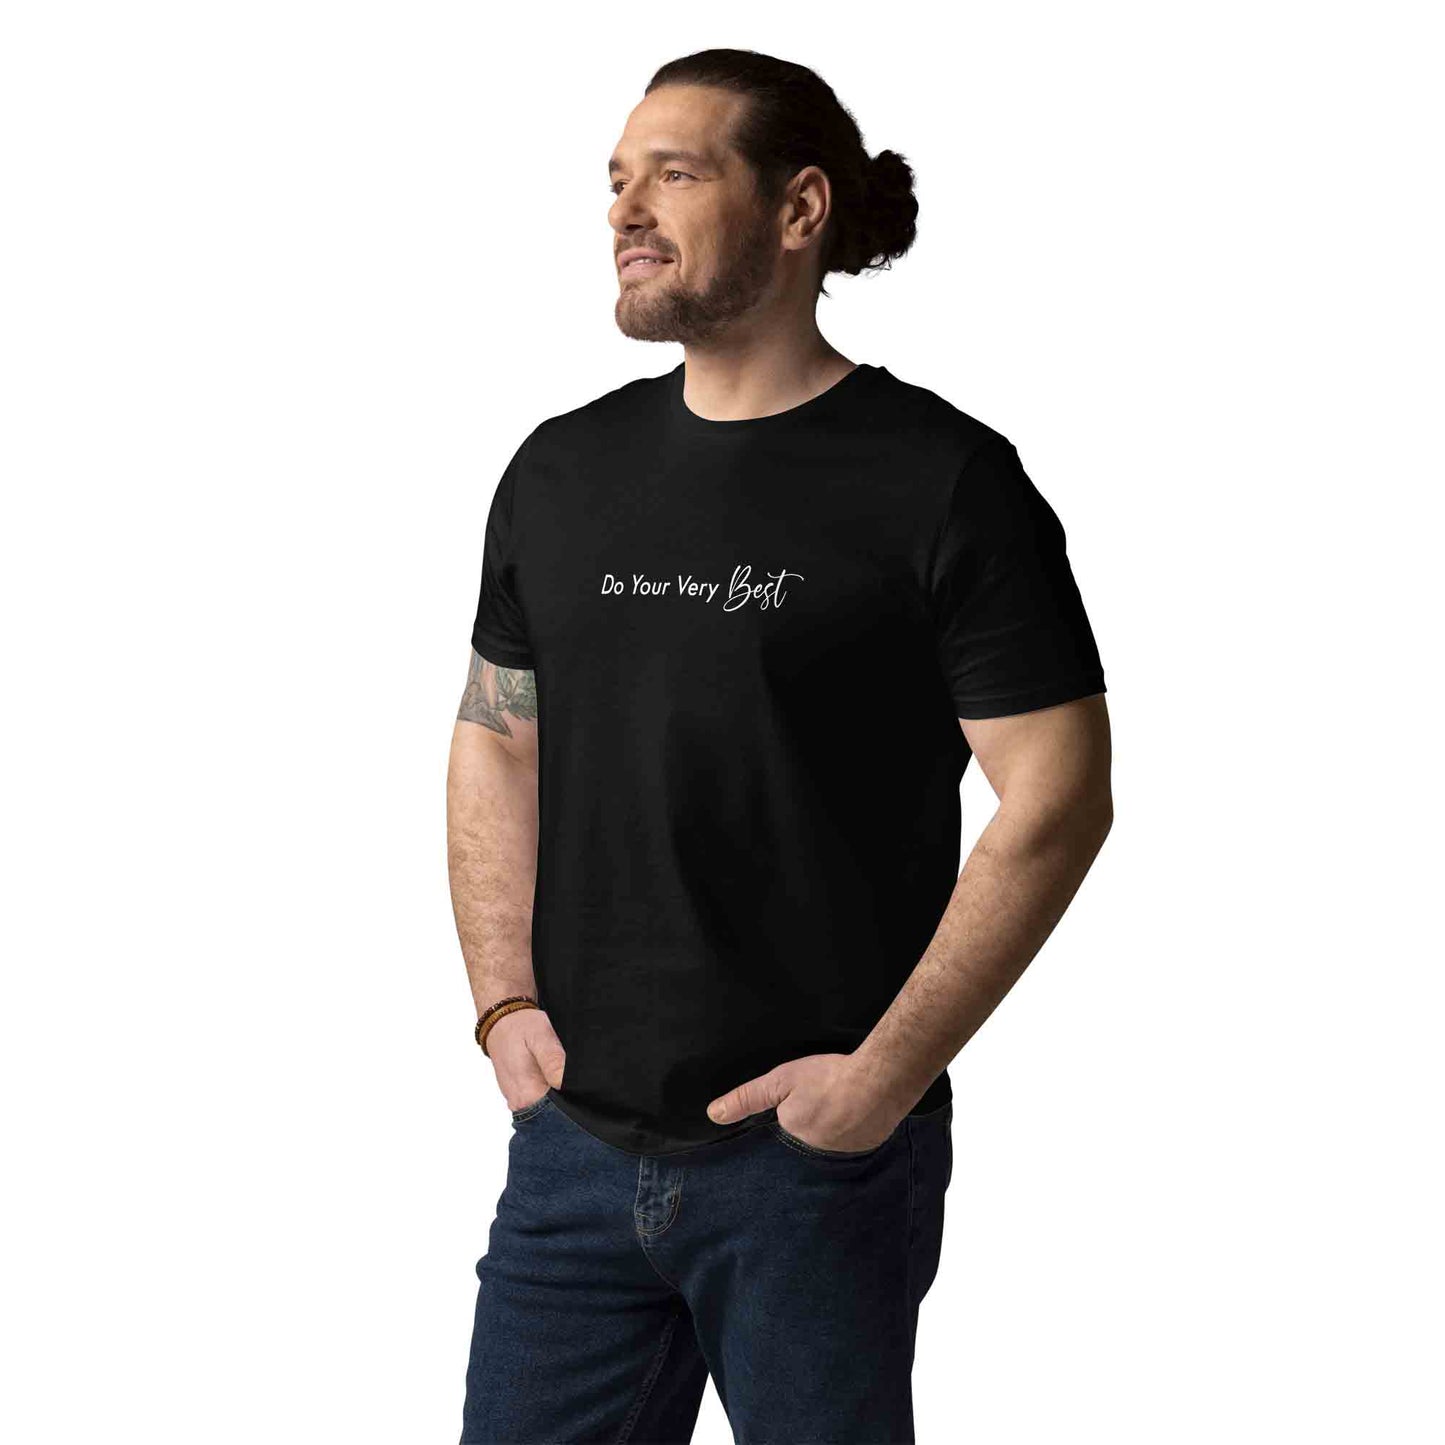 Men black 100% organic cotton t-shirt with motivational quote, "Do Your Very Best."